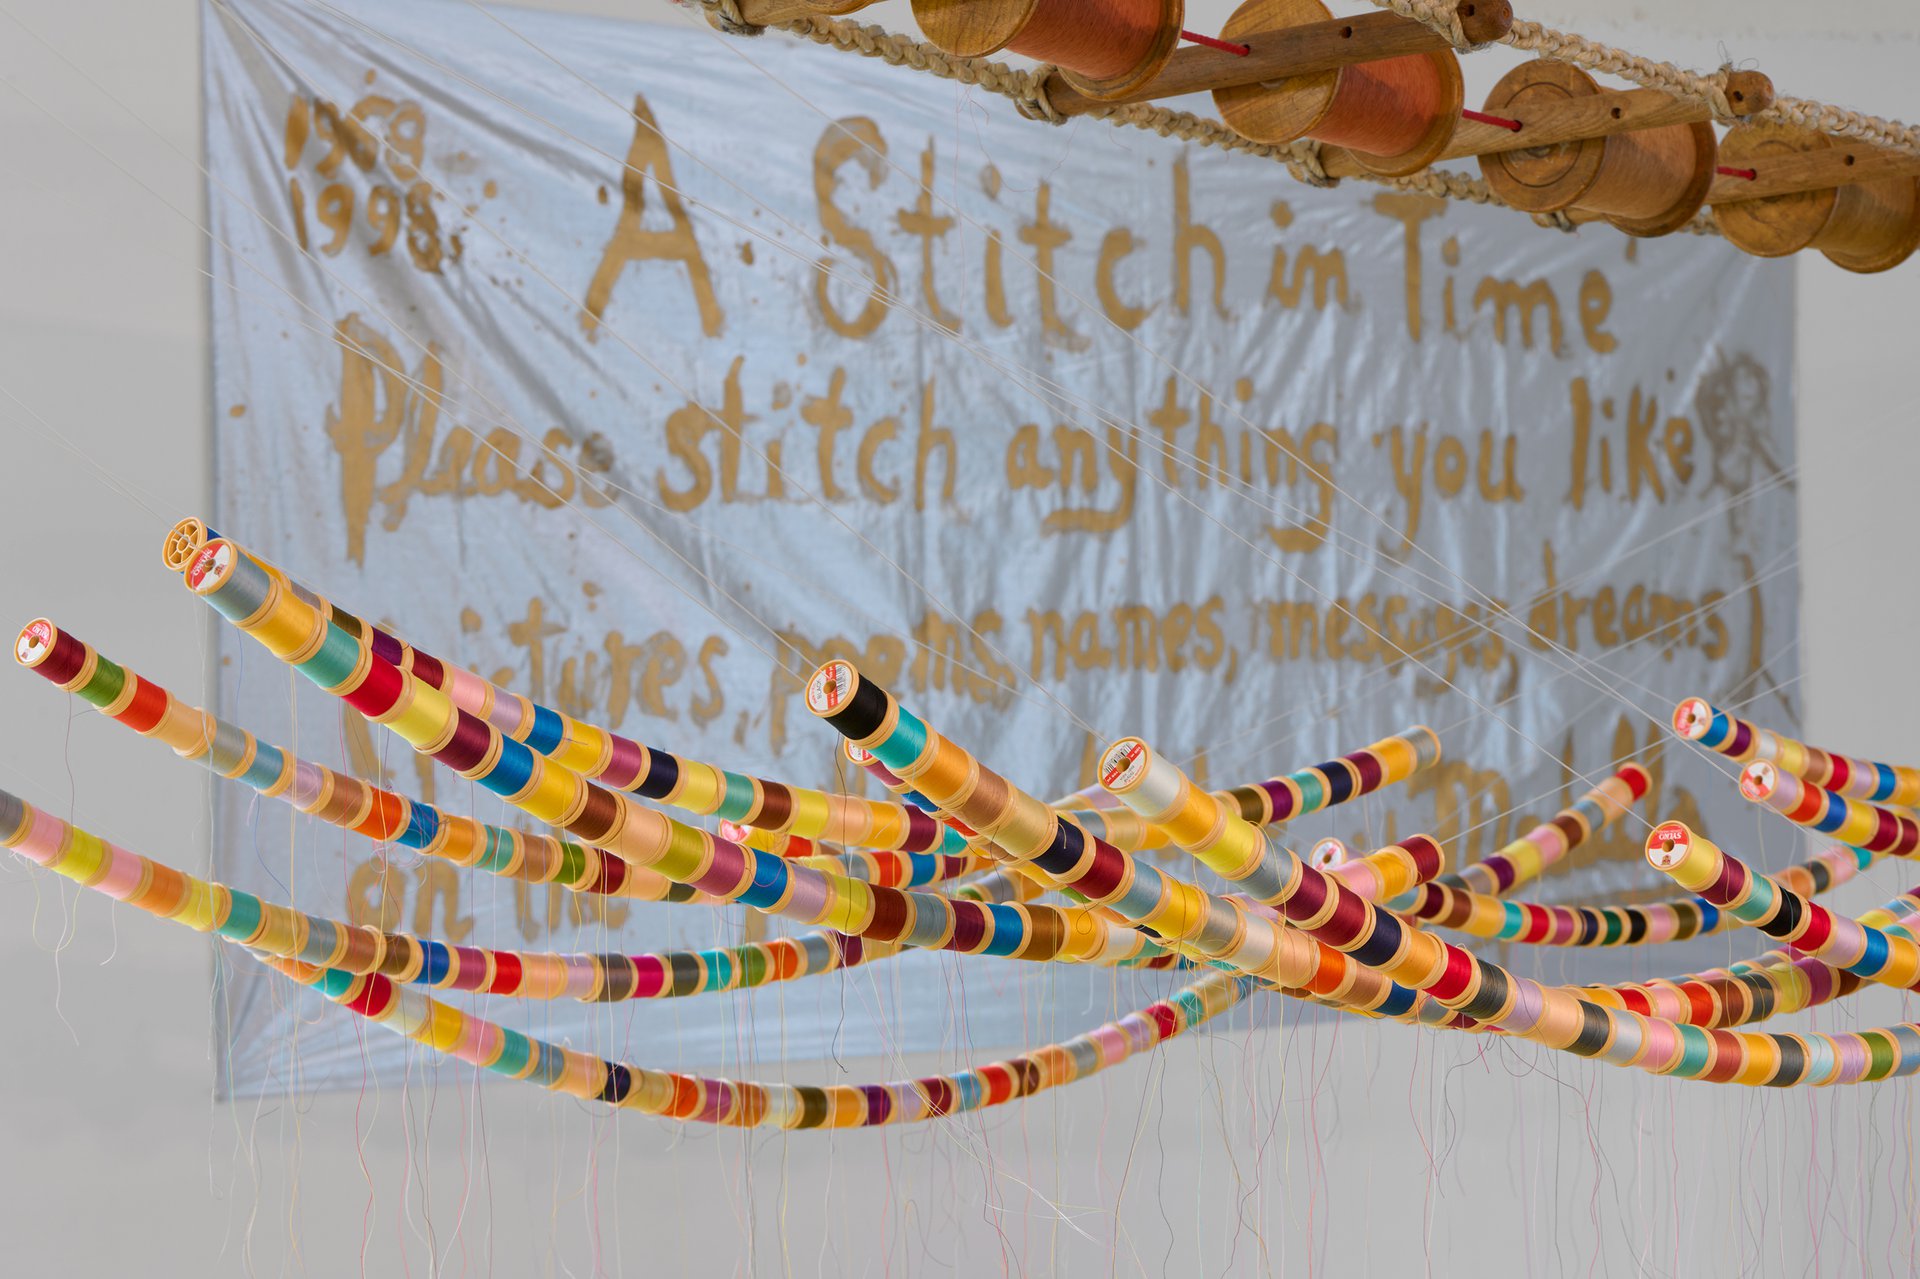 David Medalla, Stitch in Time, 1981-1982, Various materials and thread on nylon fabric, 162 x 152,5 x 5,5 cm, Bonner Kunstverein, 2021.